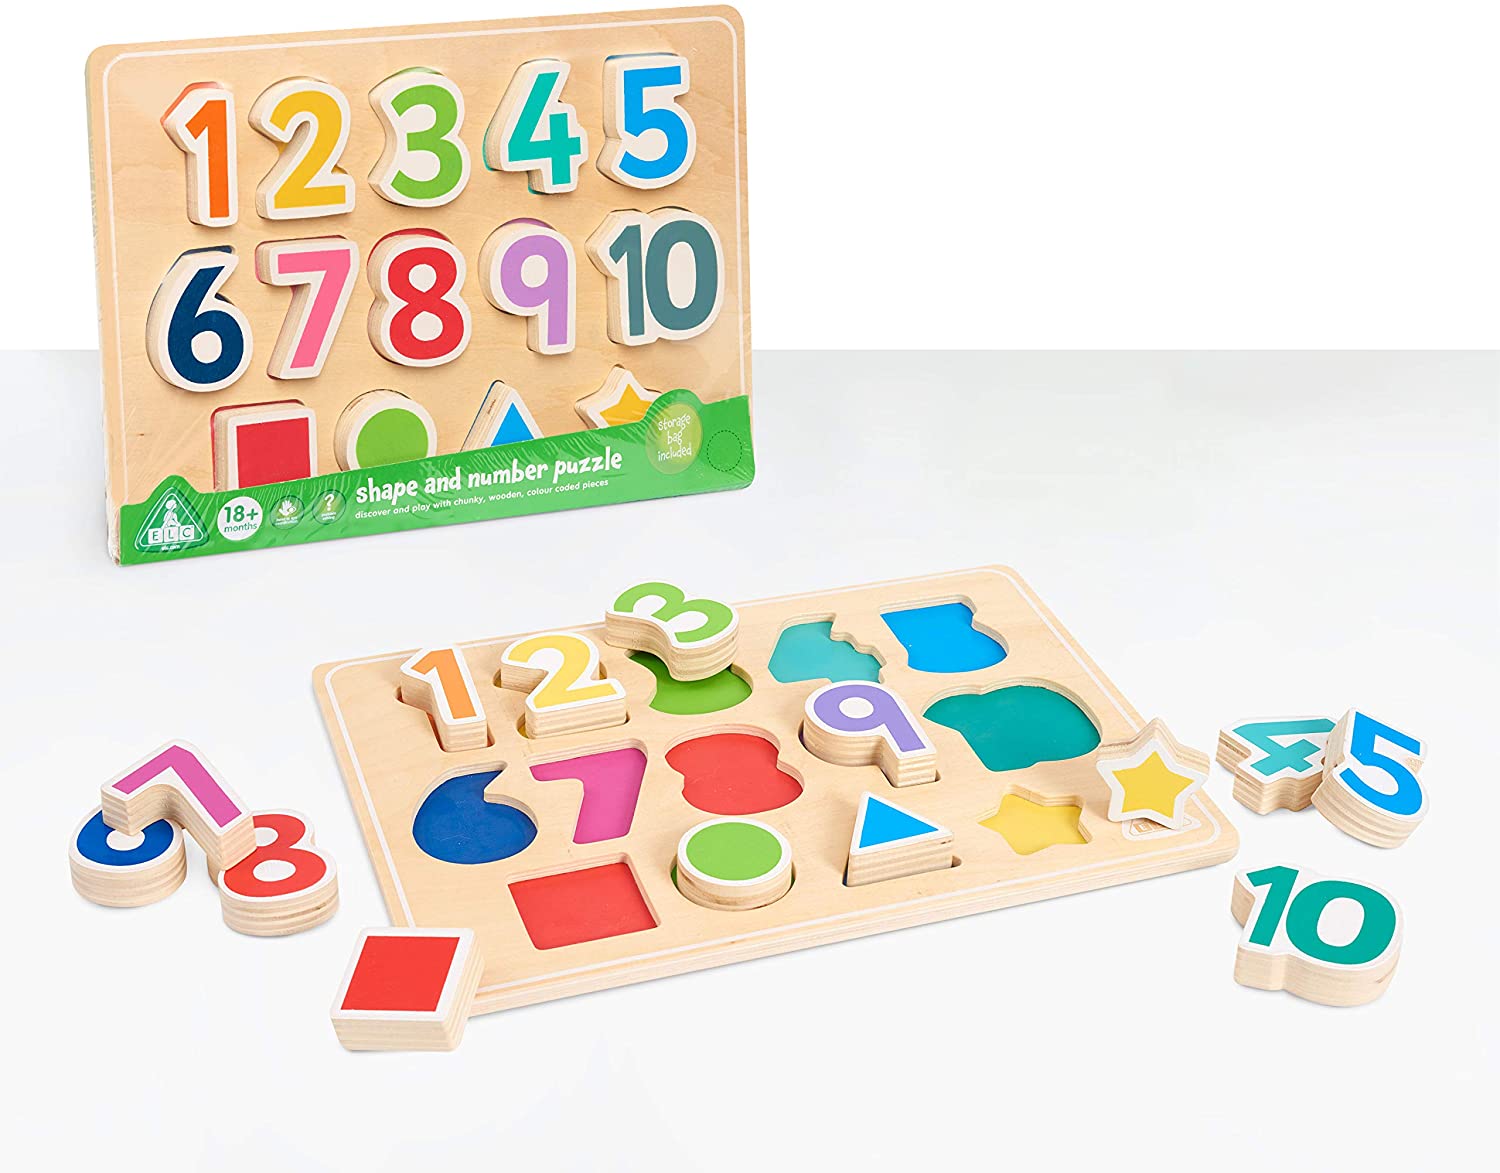 14-Piece Early Learning Centre Wood Shape & Number Puzzle $7.92, 26-Piece Alphabet Puzzle $8.18 + Free Shipping w/ Prime or on $25+